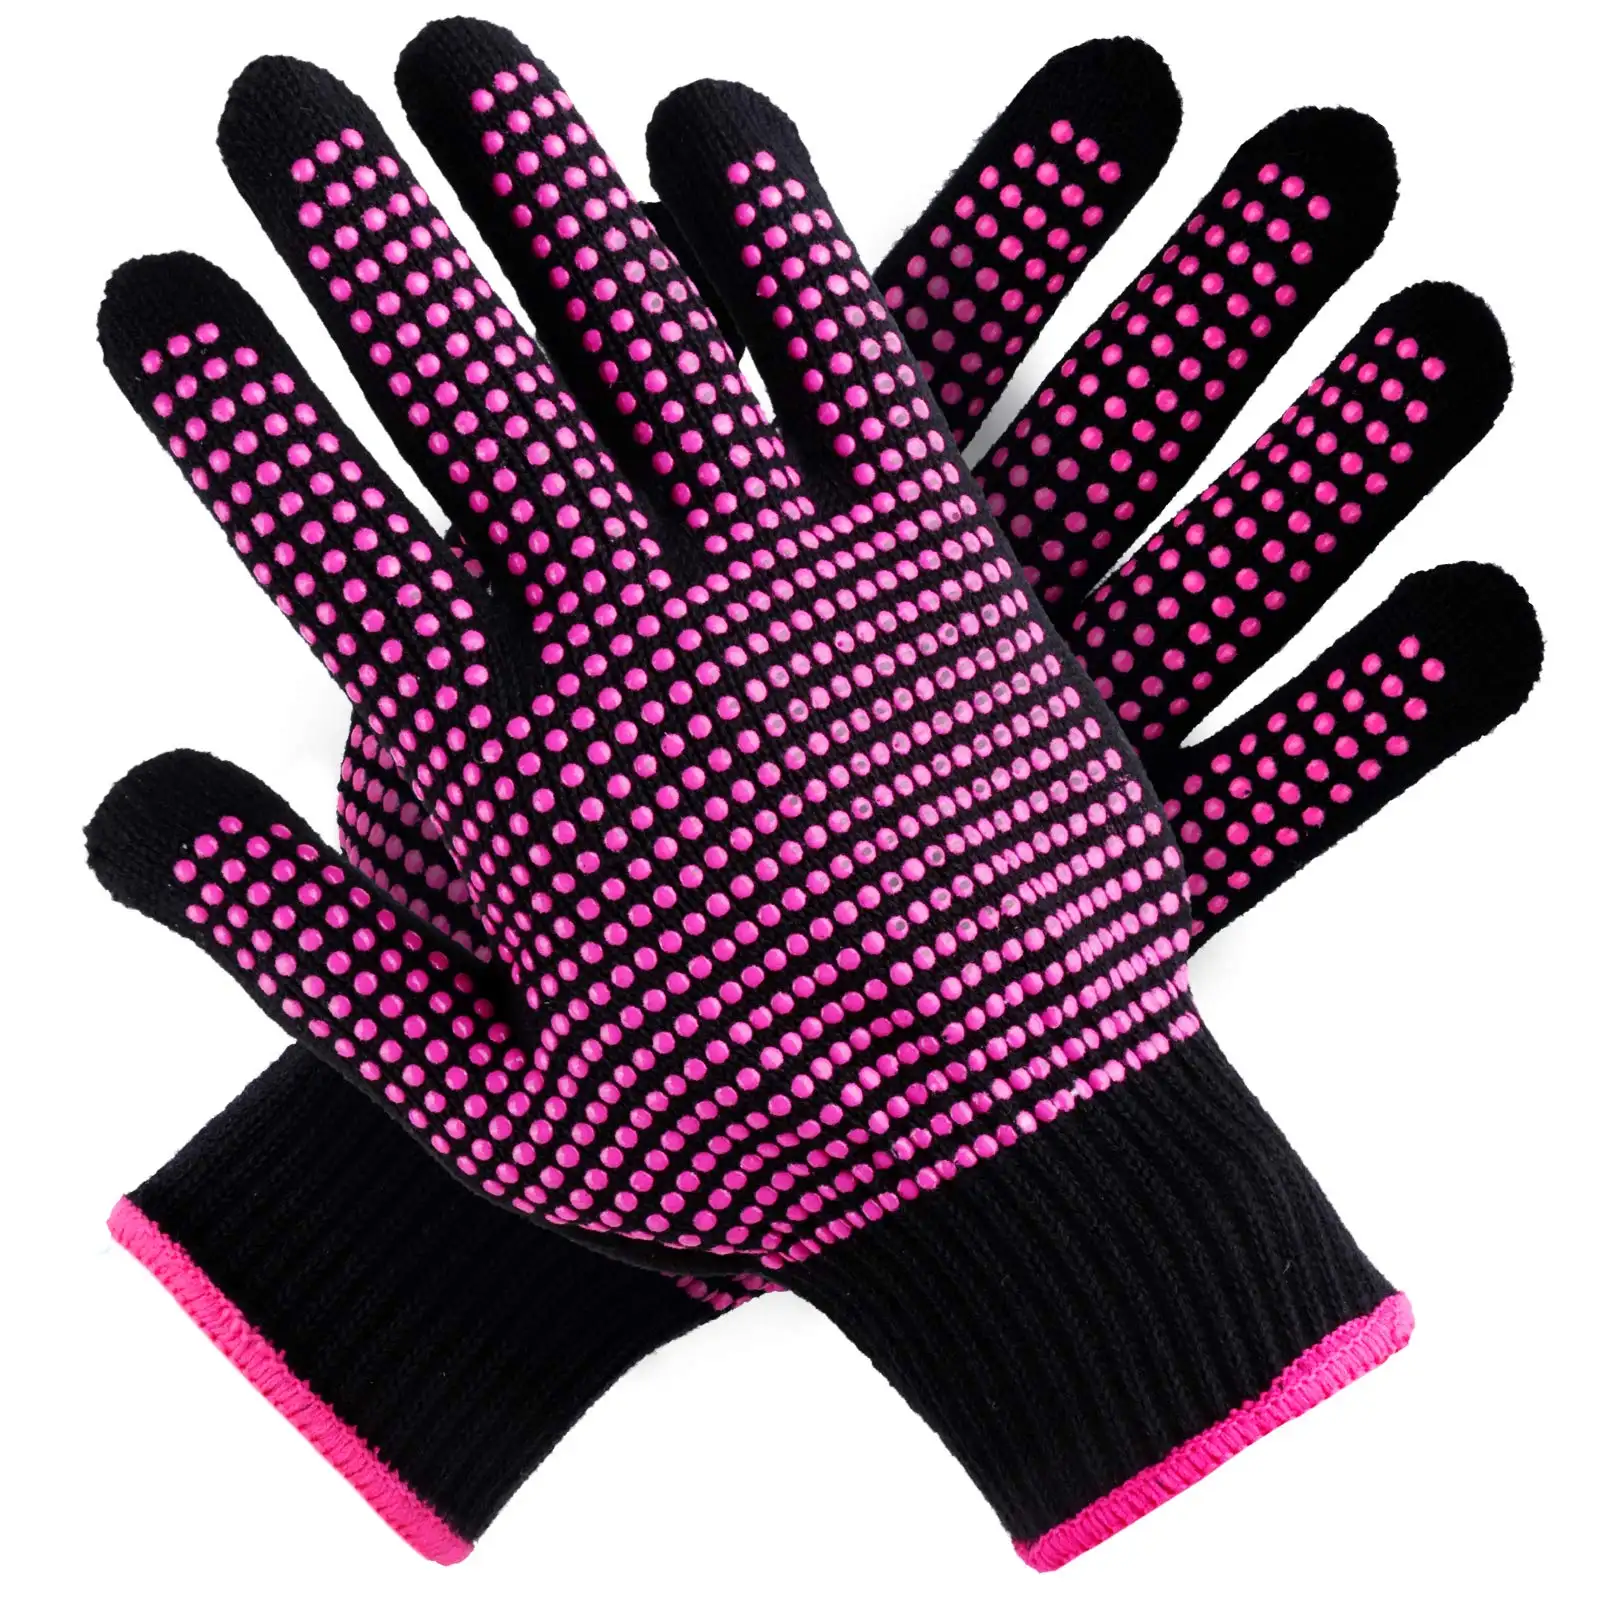 Professional Heat Proof Glove Mitts Heat Resistant Gloves With Silicone Bumps For Hair Styling Curling Iron Wand Brushes//